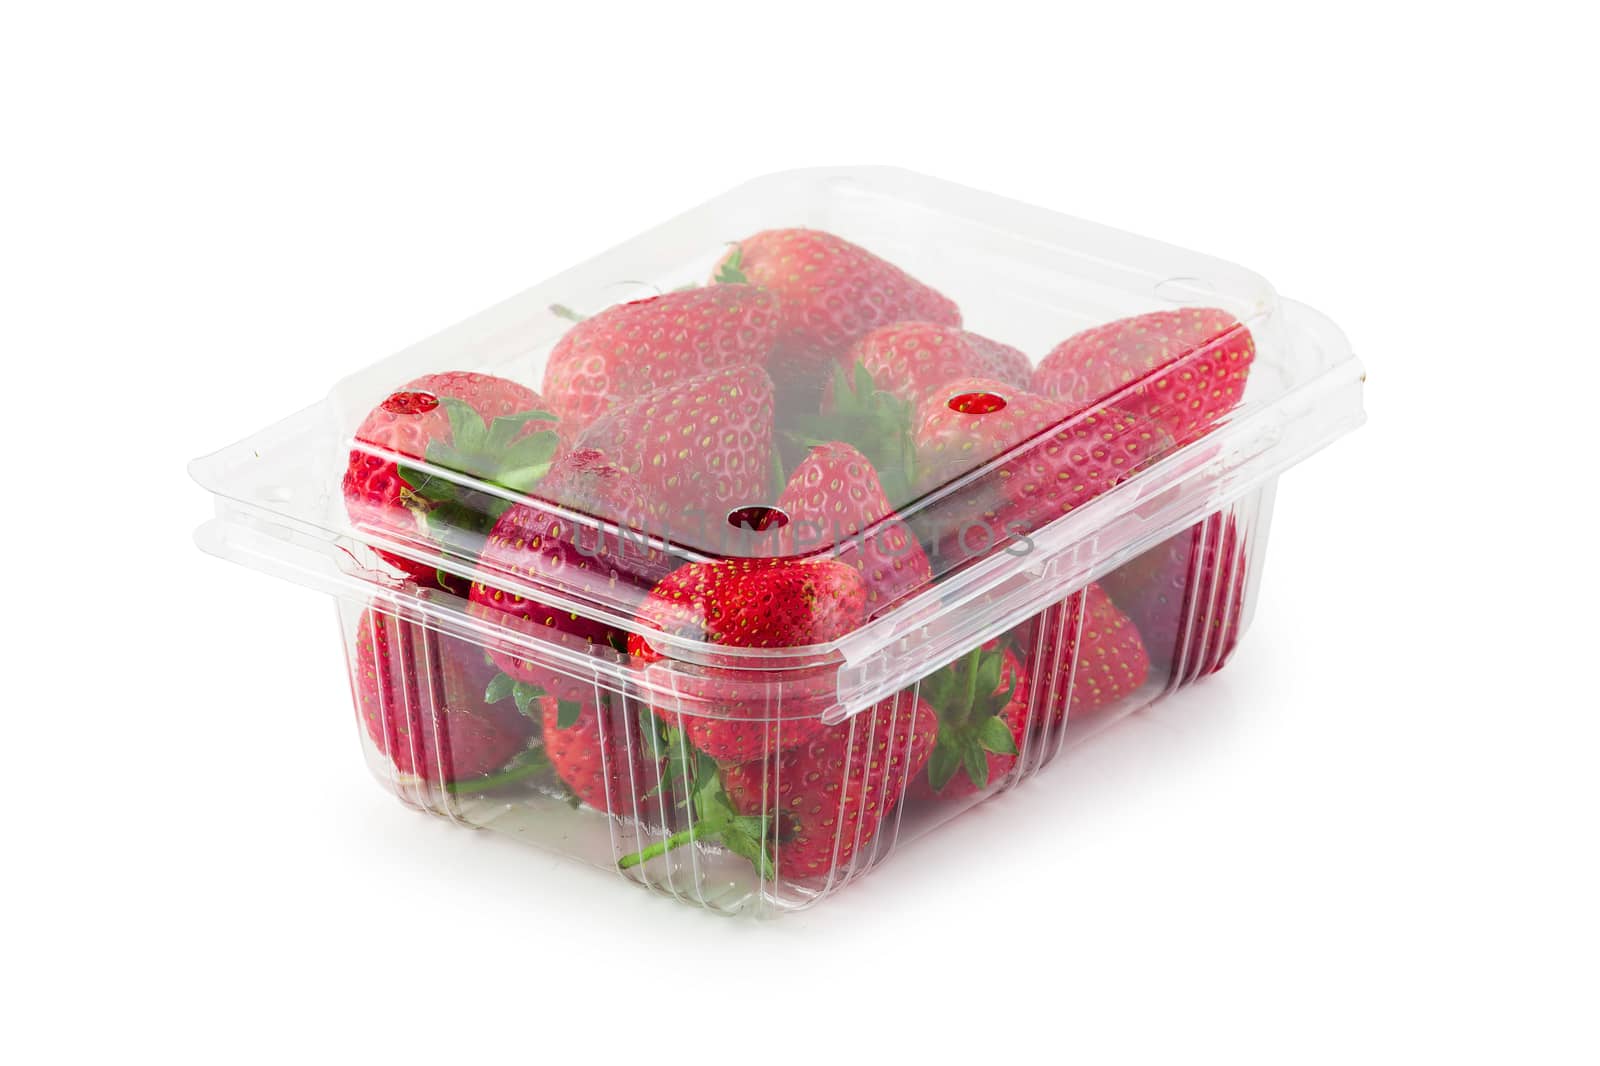 Fresh strawberries in a clear plastic box isolated on a white background.